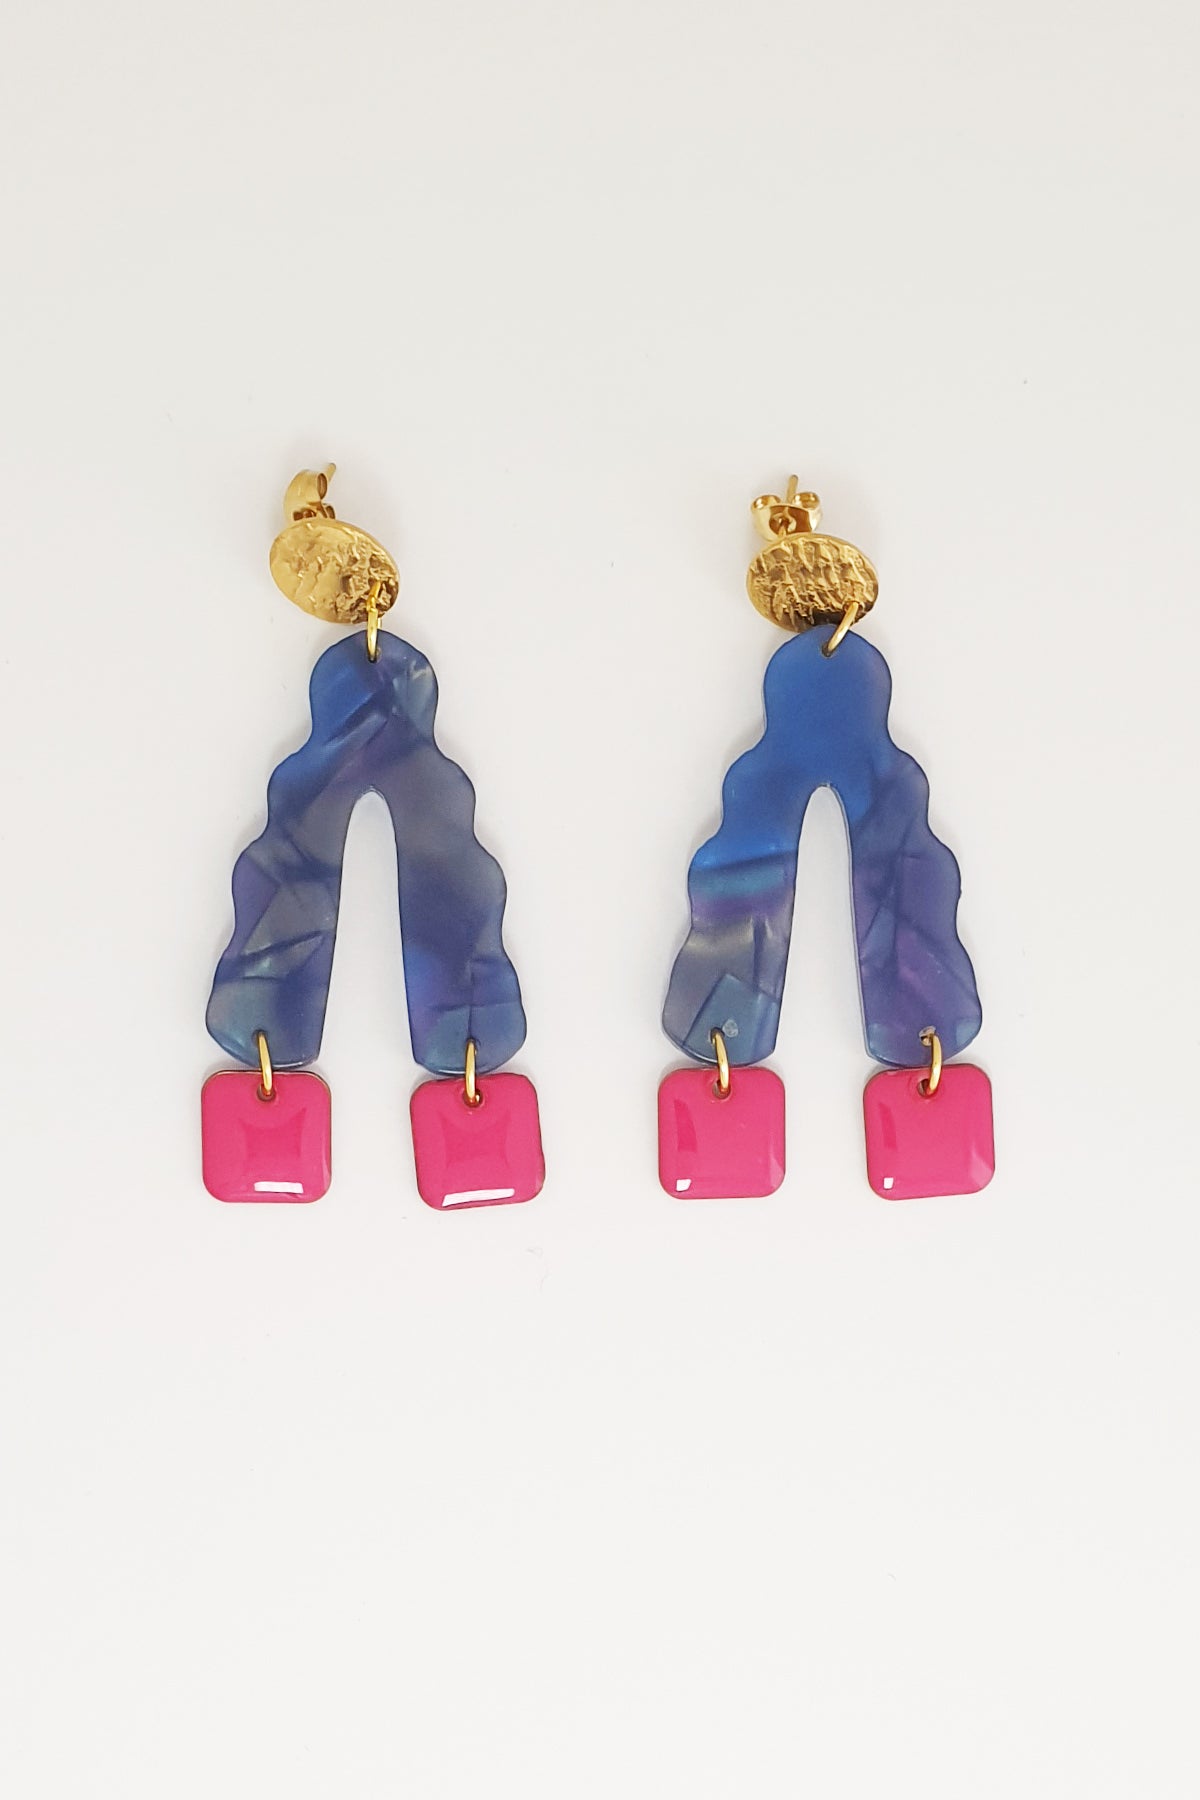 A pair of stud dangle earrings sit against a white background. They feature a textured circular gold stud top, a blue wavy upside down V-shaped acrylic, and magenta square shaped enamel drops hanging from each end of the acrylic.